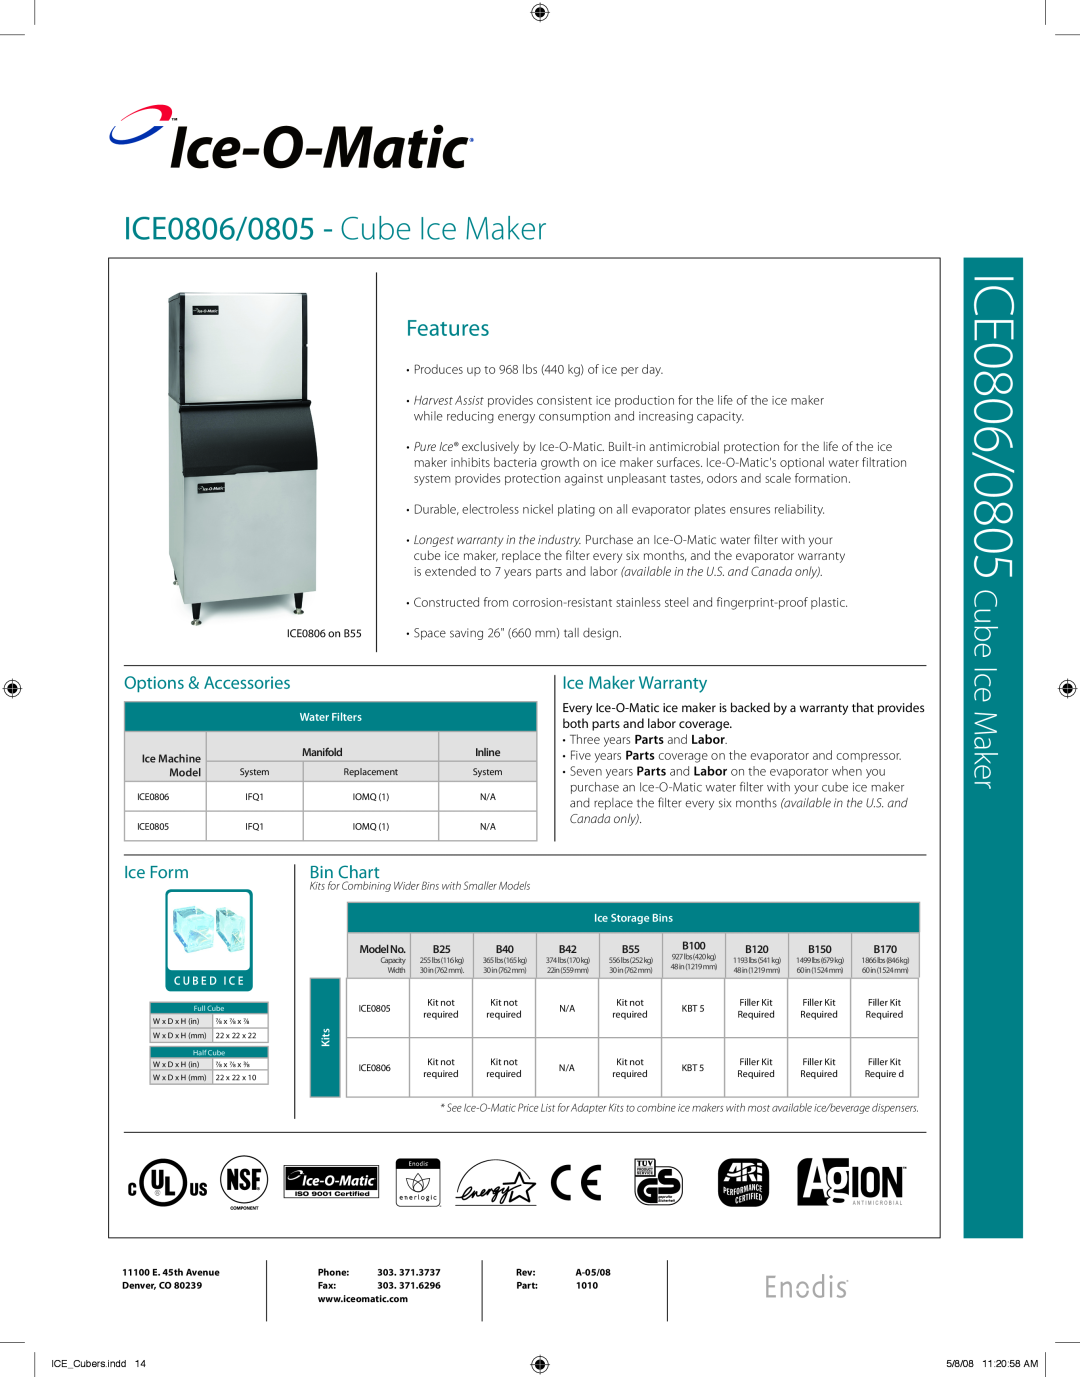 Ice-O-Matic ICE0805 warranty Ice-O-Matic, Options & Accessories, Ice Maker Warranty, Ice Form, Bin Chart, Features 